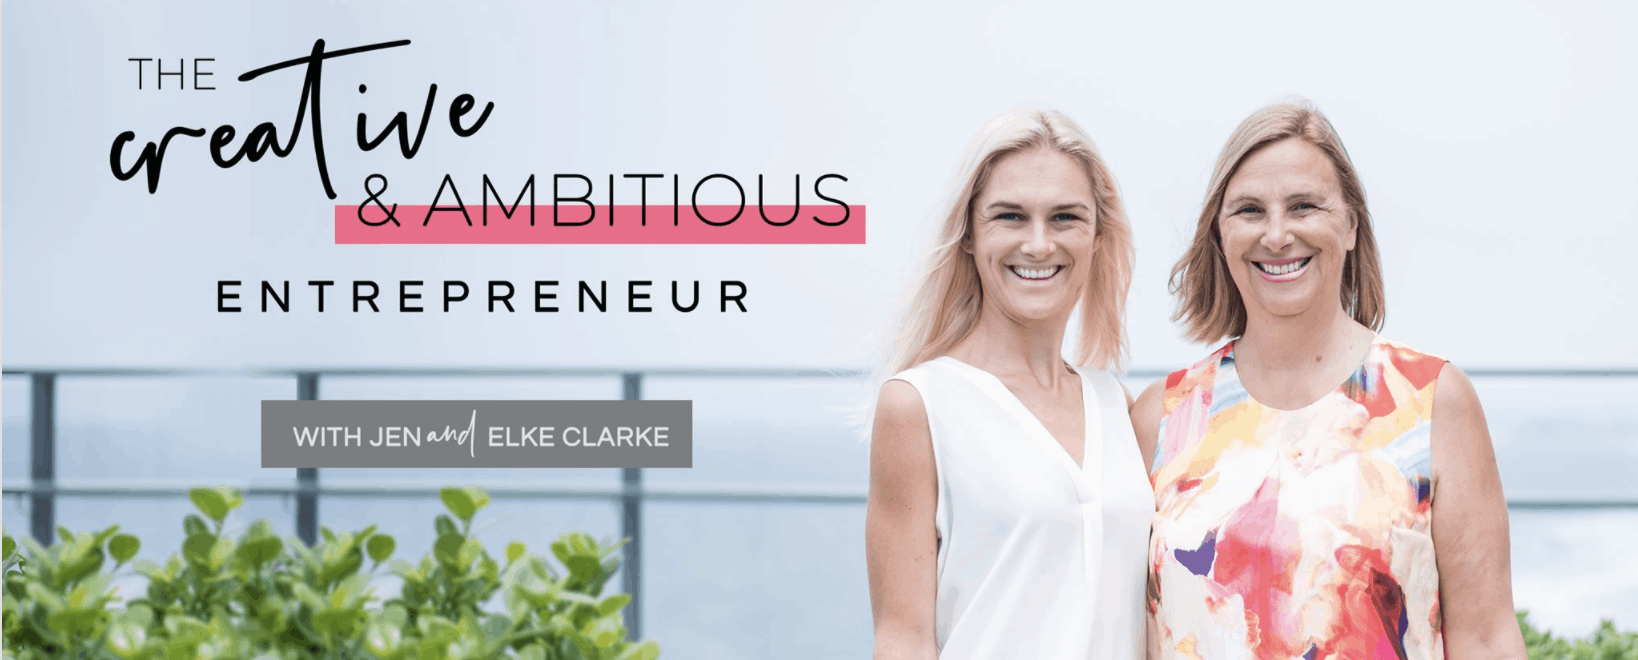 The Creative and Ambitious Entrepreneur with Jen and Elke Clarke